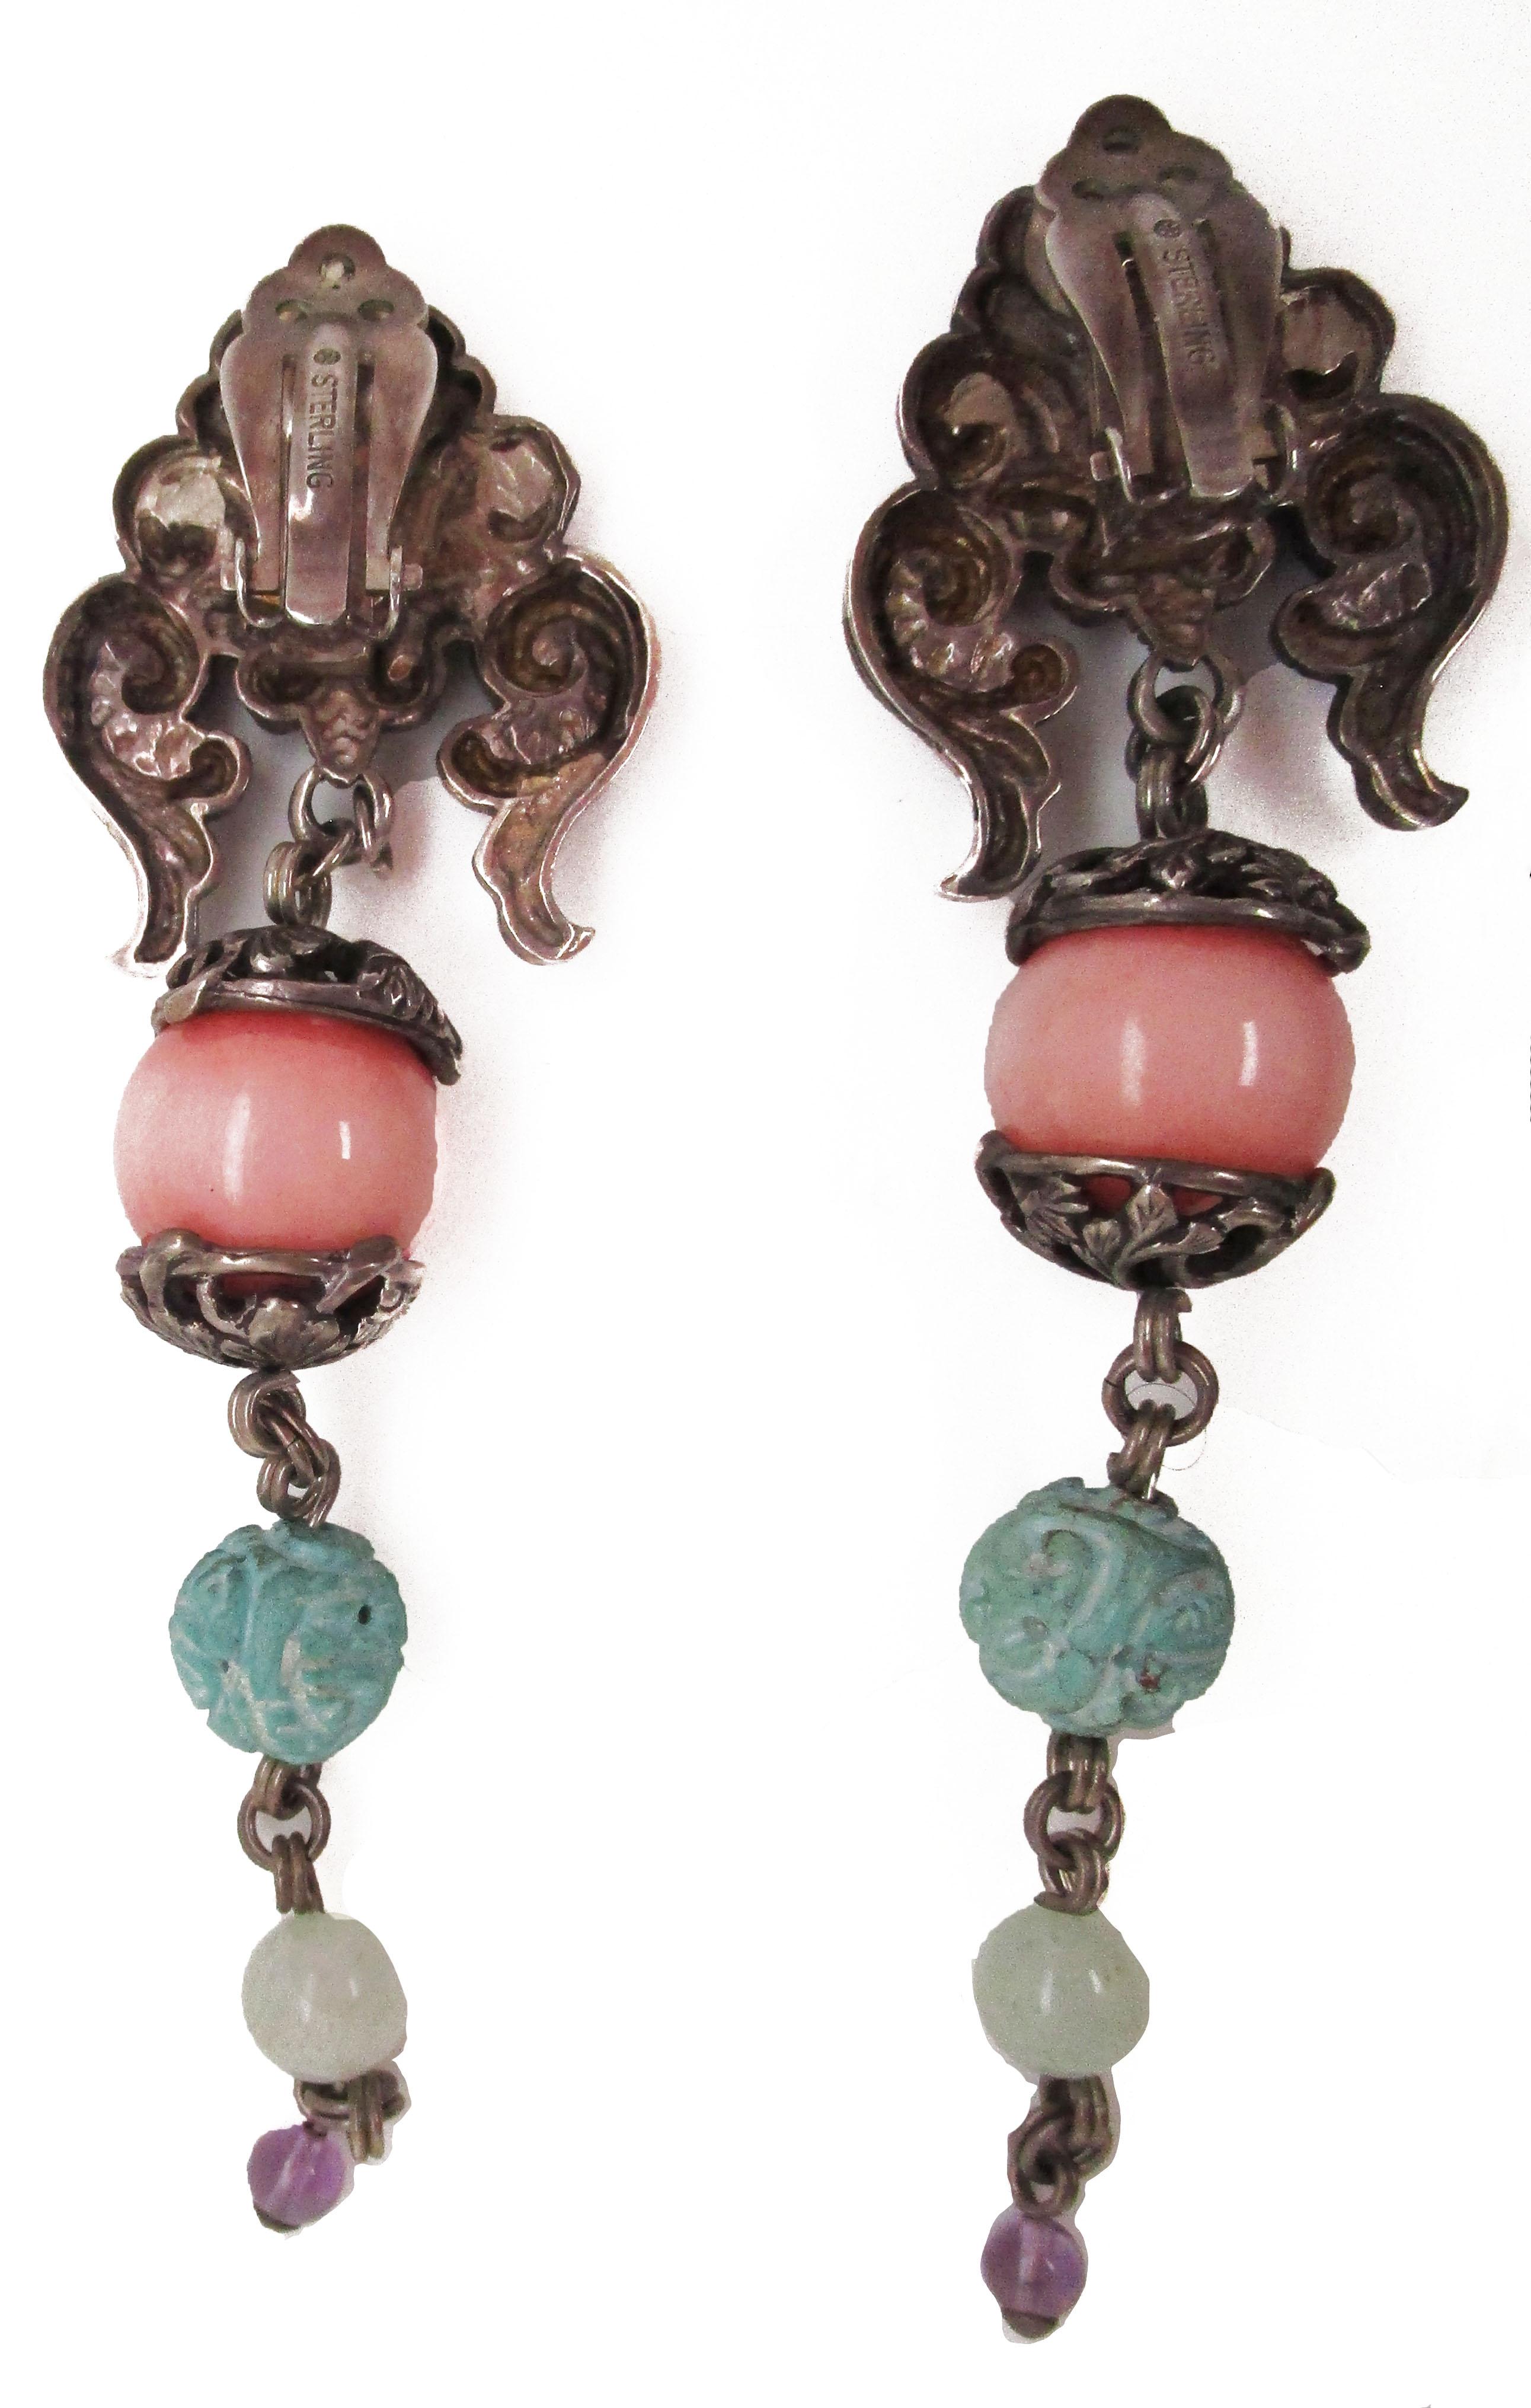 These gorgeous vintage Stephen Dweck runway earrings feature a brilliant combination of sterling silver, carved turquoise, jade, and amethyst in a dramatic dangle style. These clip-on earrings have a dramatic, long large to small graduated center